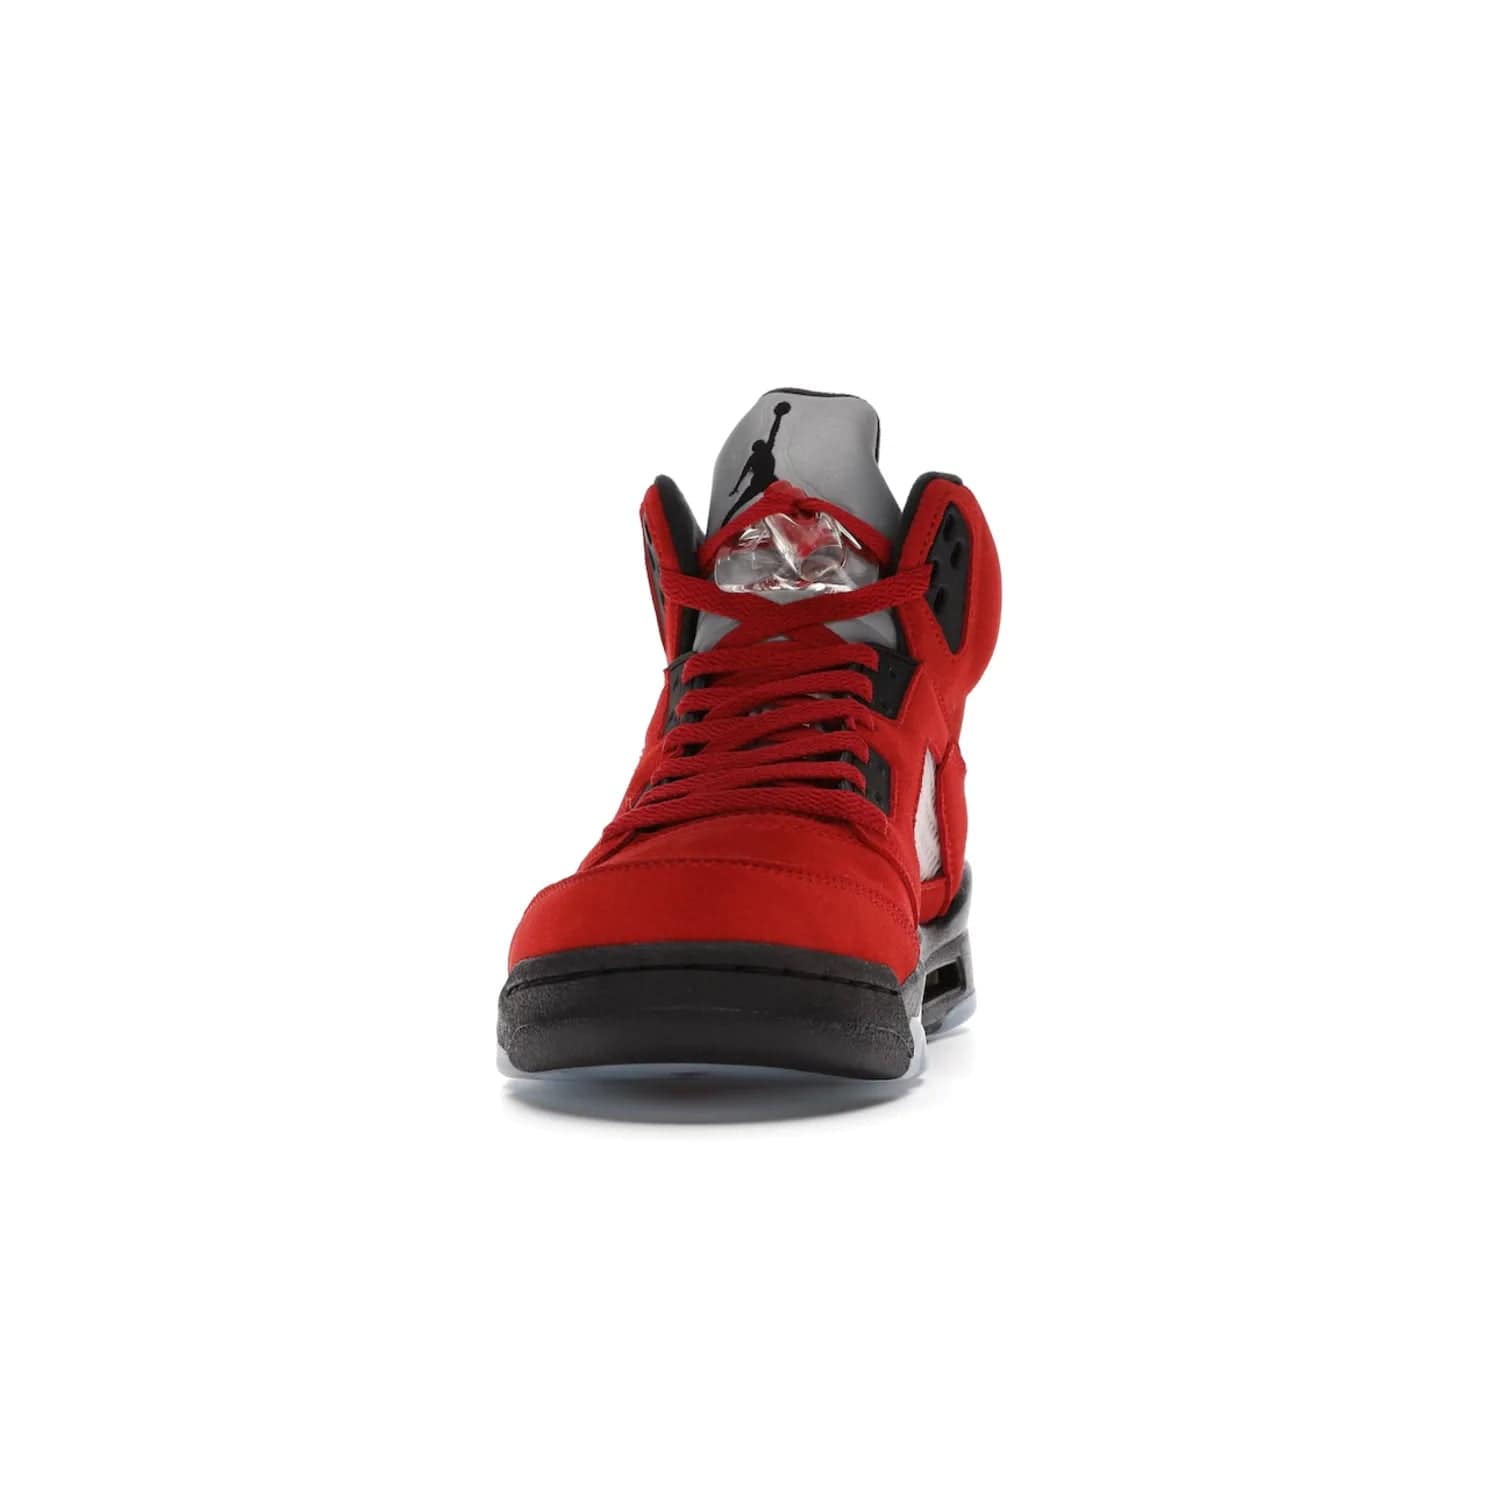 Jordan 5 Retro Raging Bull Red (2021) - Image 11 - Only at www.BallersClubKickz.com - Get ready for the 2021 stand-alone release of the Air Jordan 5 Raging Bulls! This all-suede upper combines luxe details like a Jumpman logo, red & black "23" embroidery and shark tooth detailing, atop a black midsole. Don't miss out - release date in April 2021 for $190.